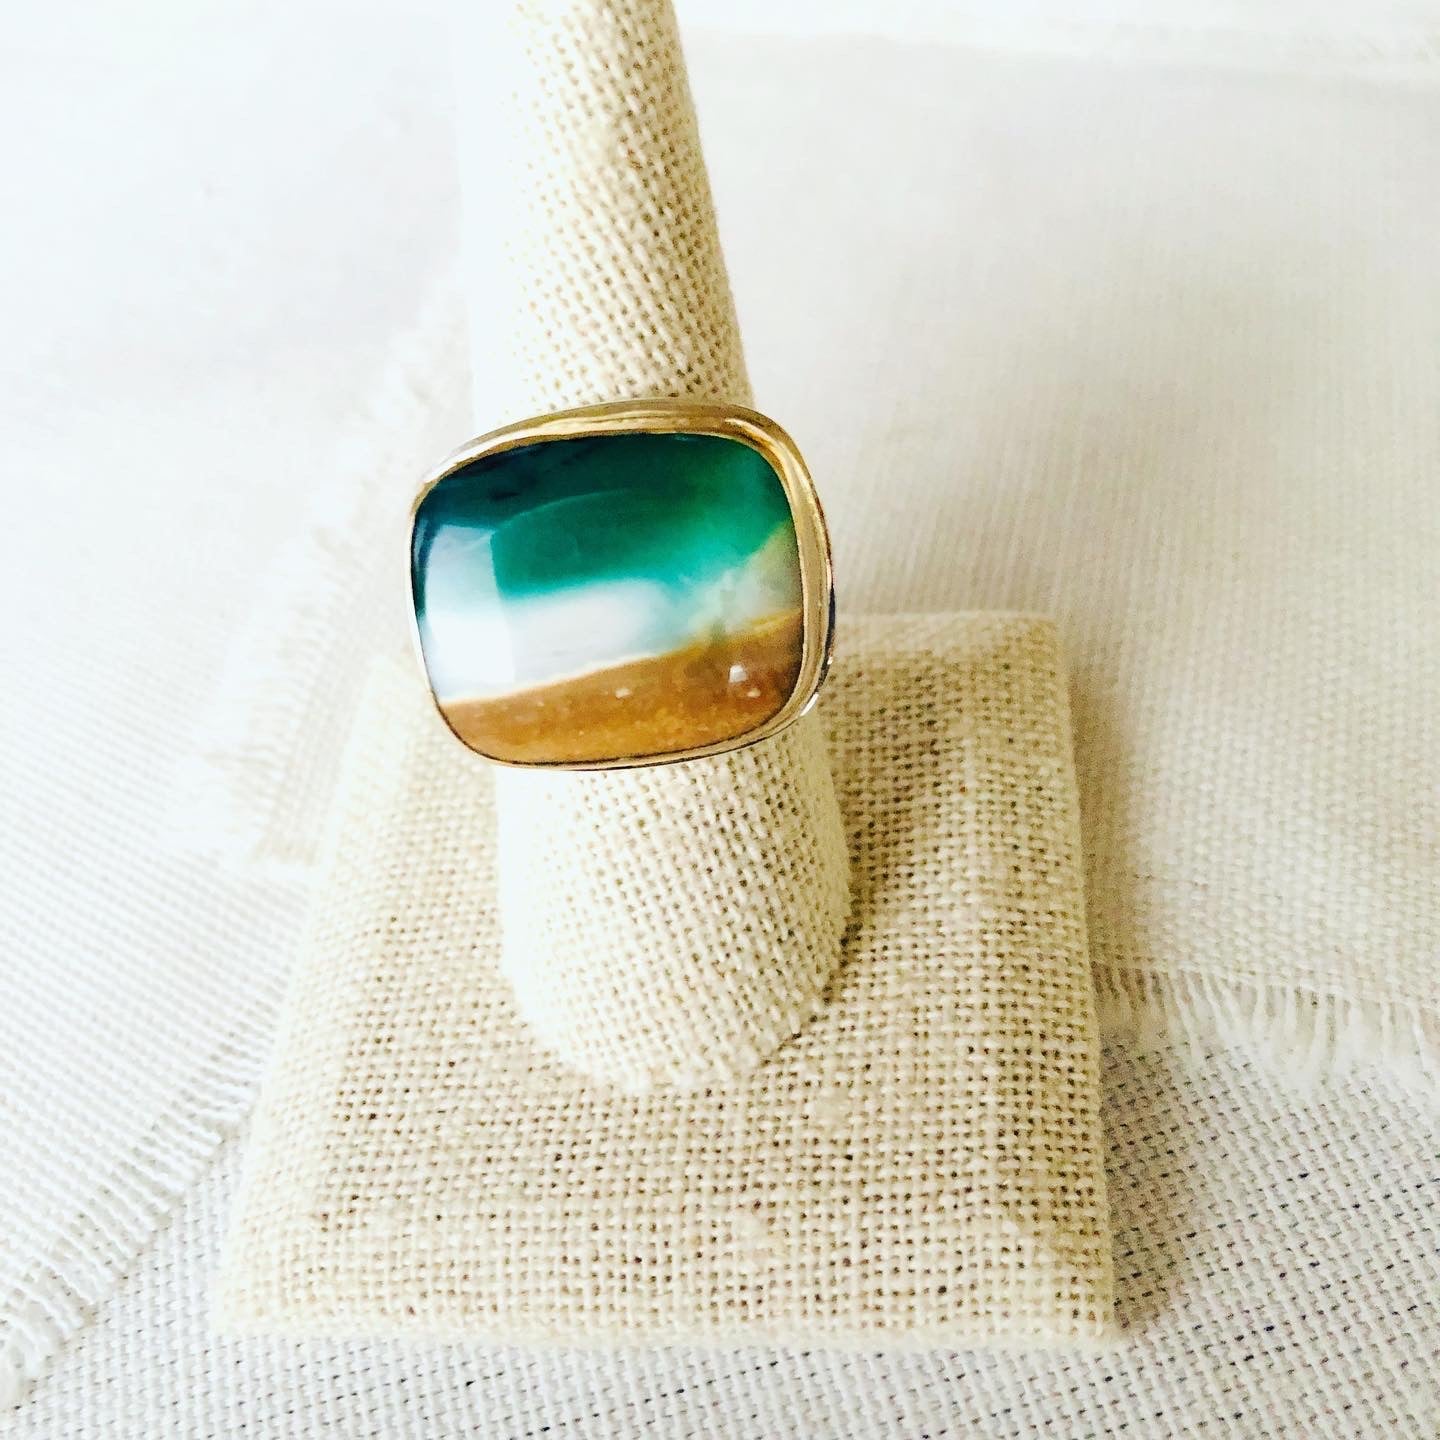 This incredible ring is made from blue opalized fossilized Indonesian wood and reminds me of the beaches of Mauil